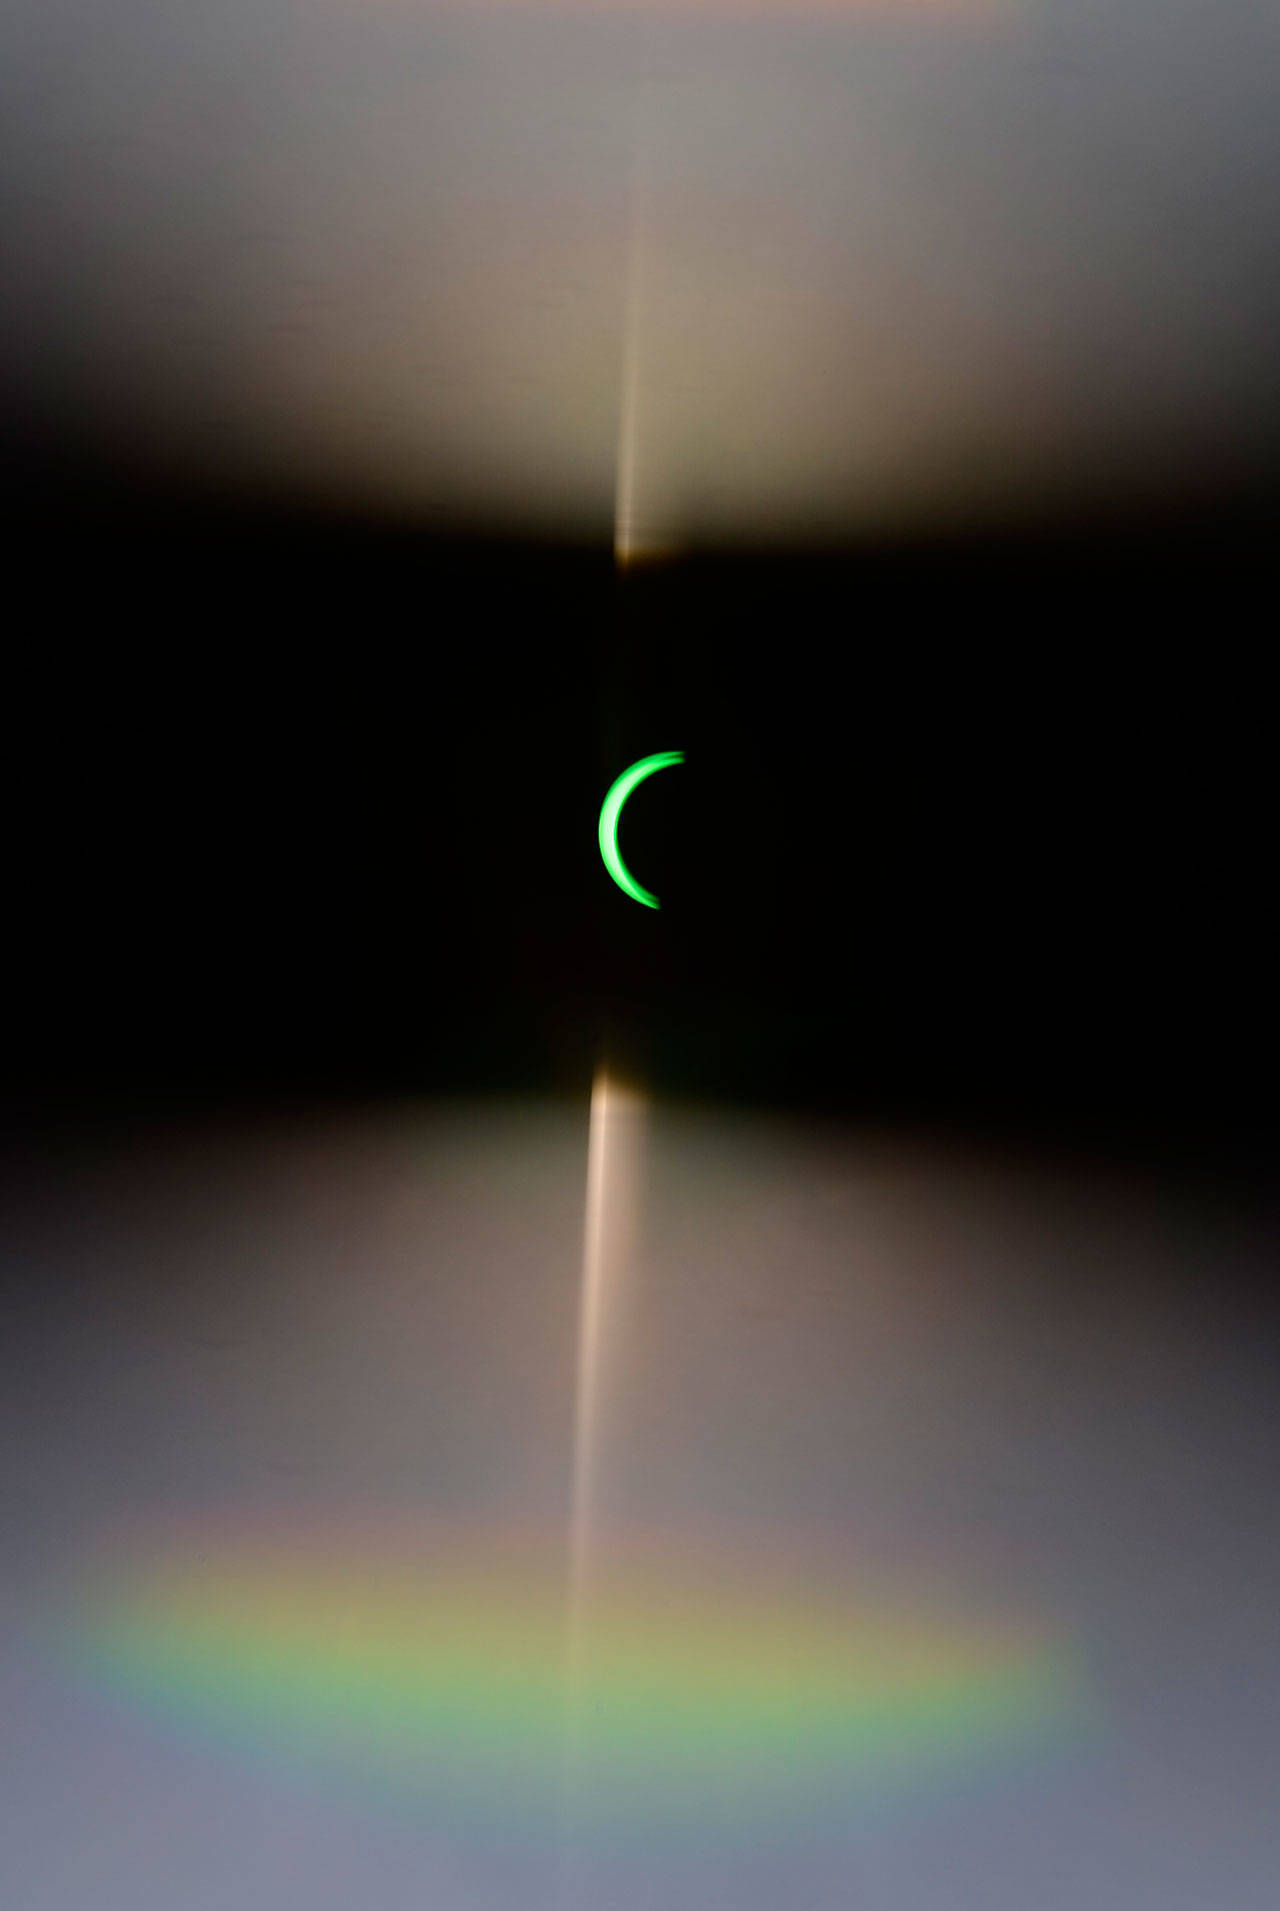 Viewed through cereal boxes or approved glasses, eclipse was a ‘wonderful sight to see’